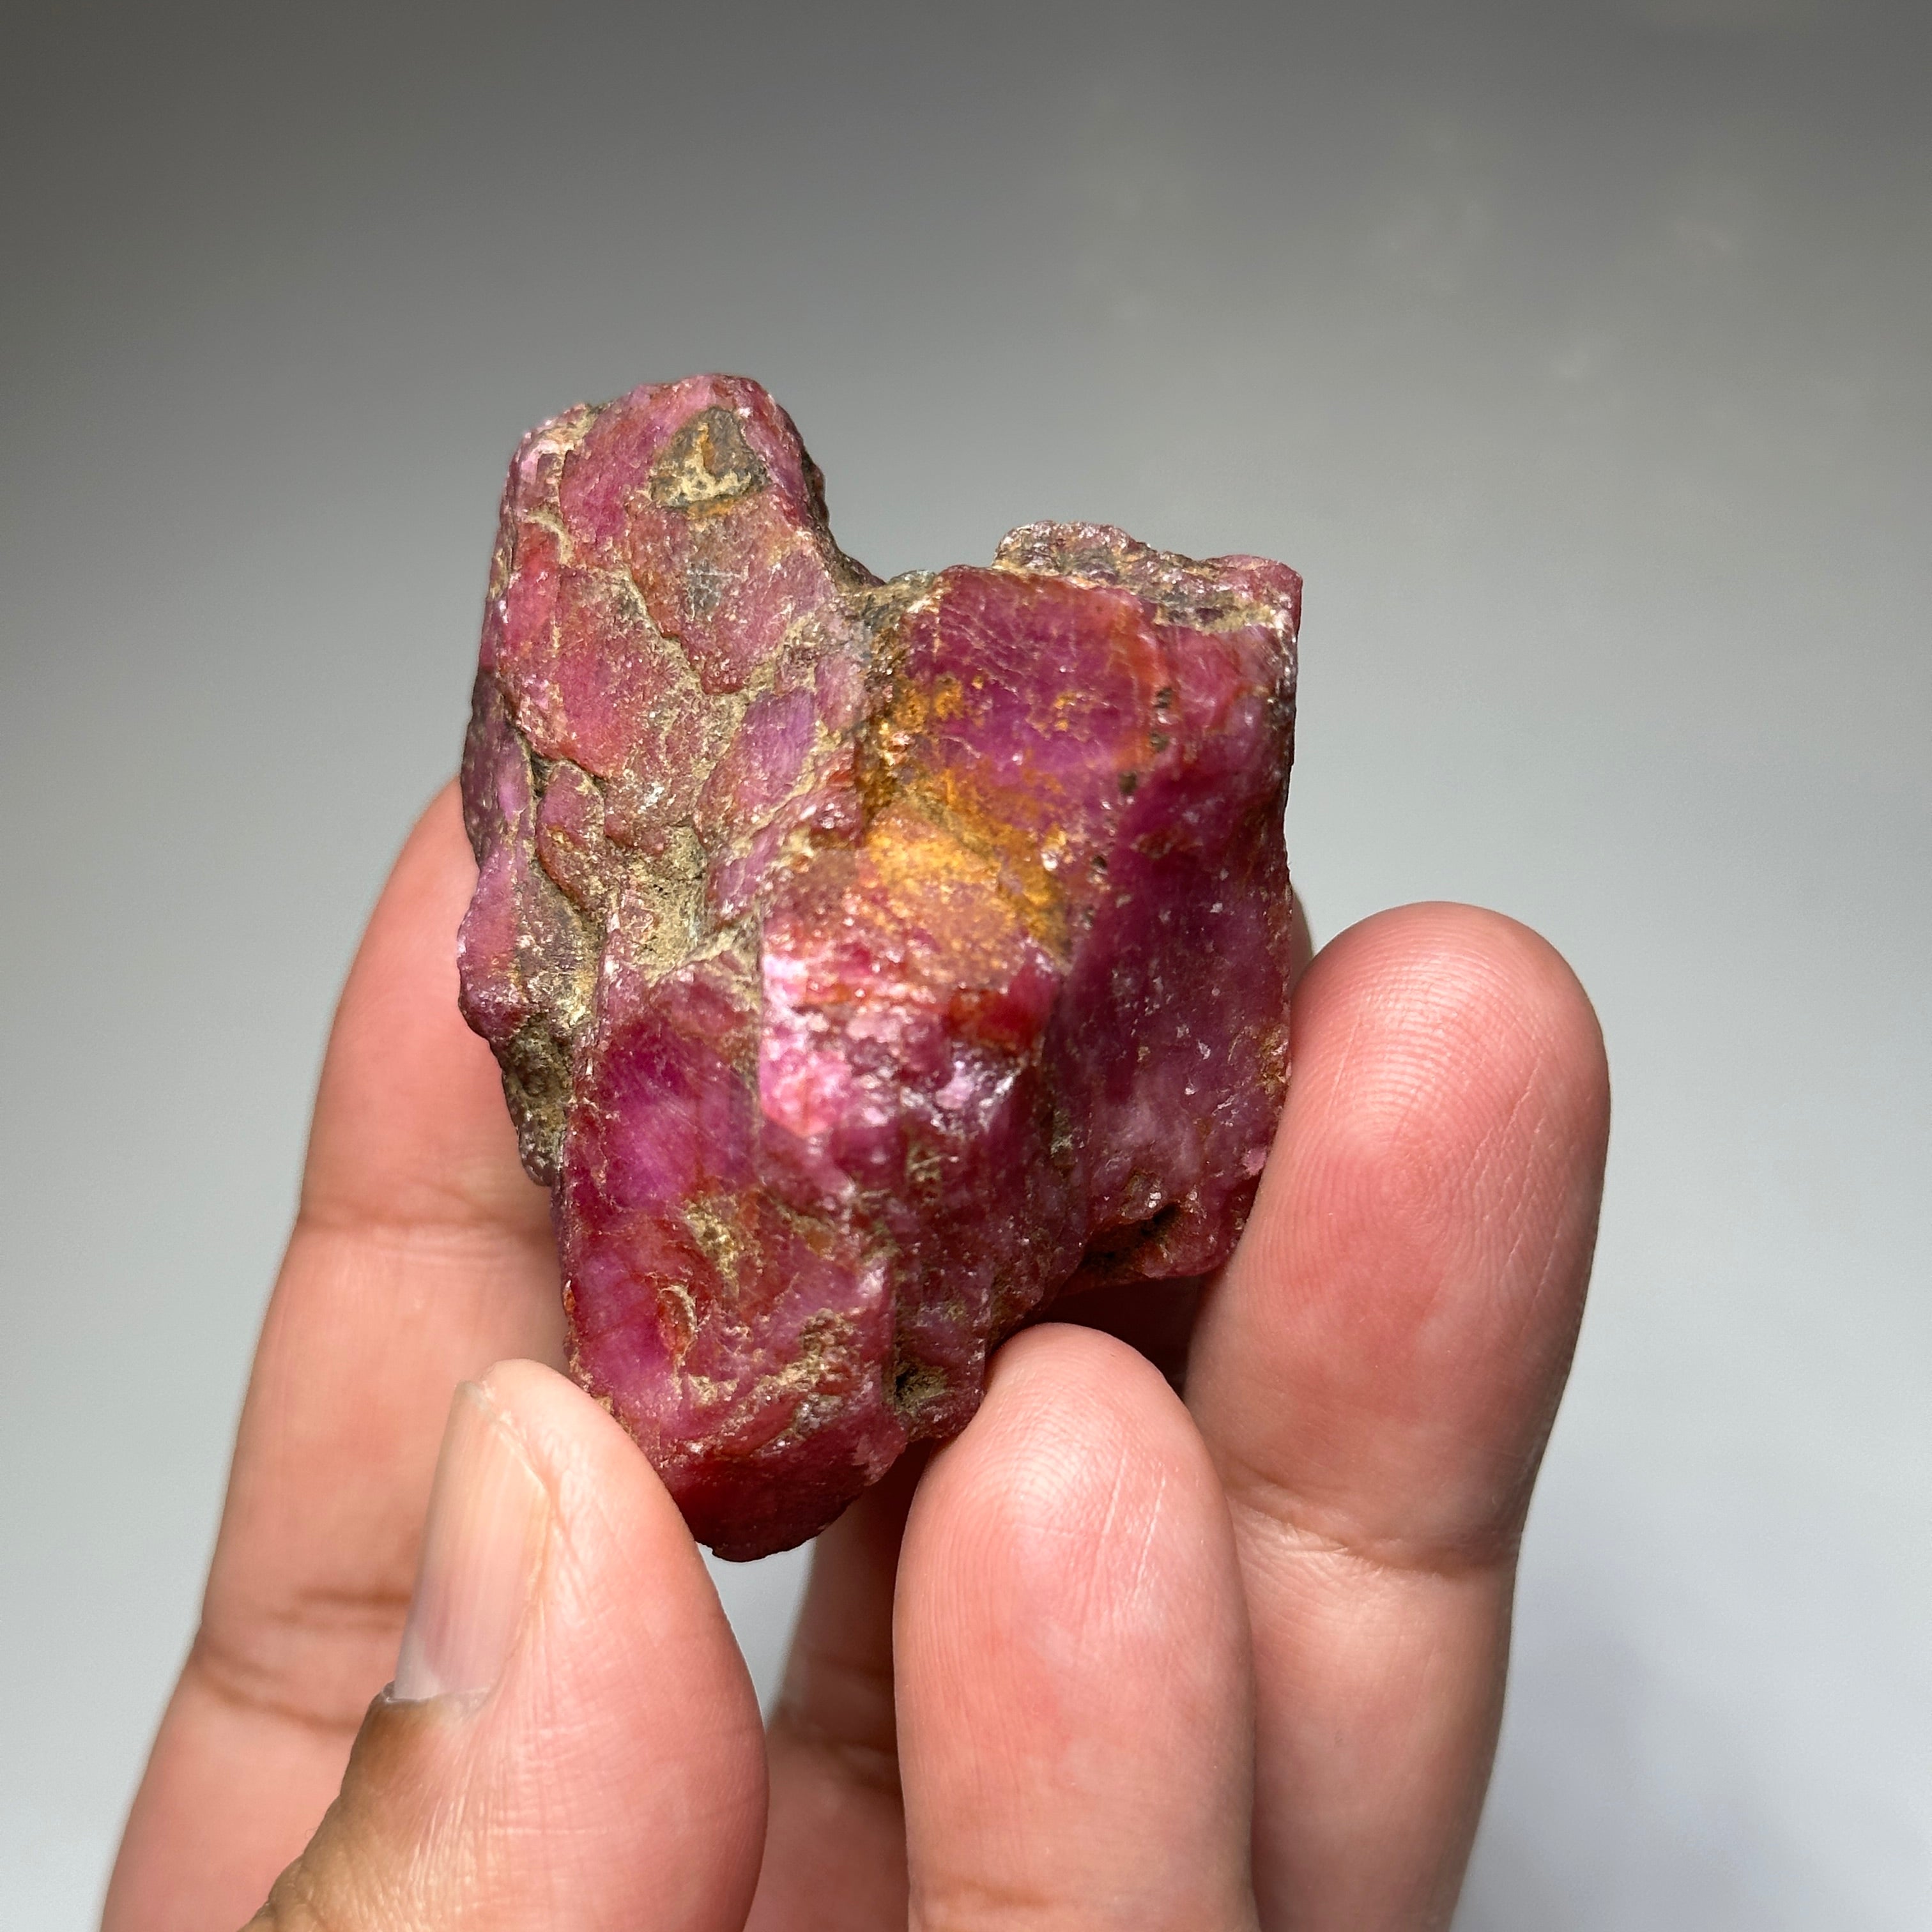 111gm / 555ct Ruby Crystal Cluster, Tanzania, Untreated Unheated. 53.5 x 46.9 x 32 mm